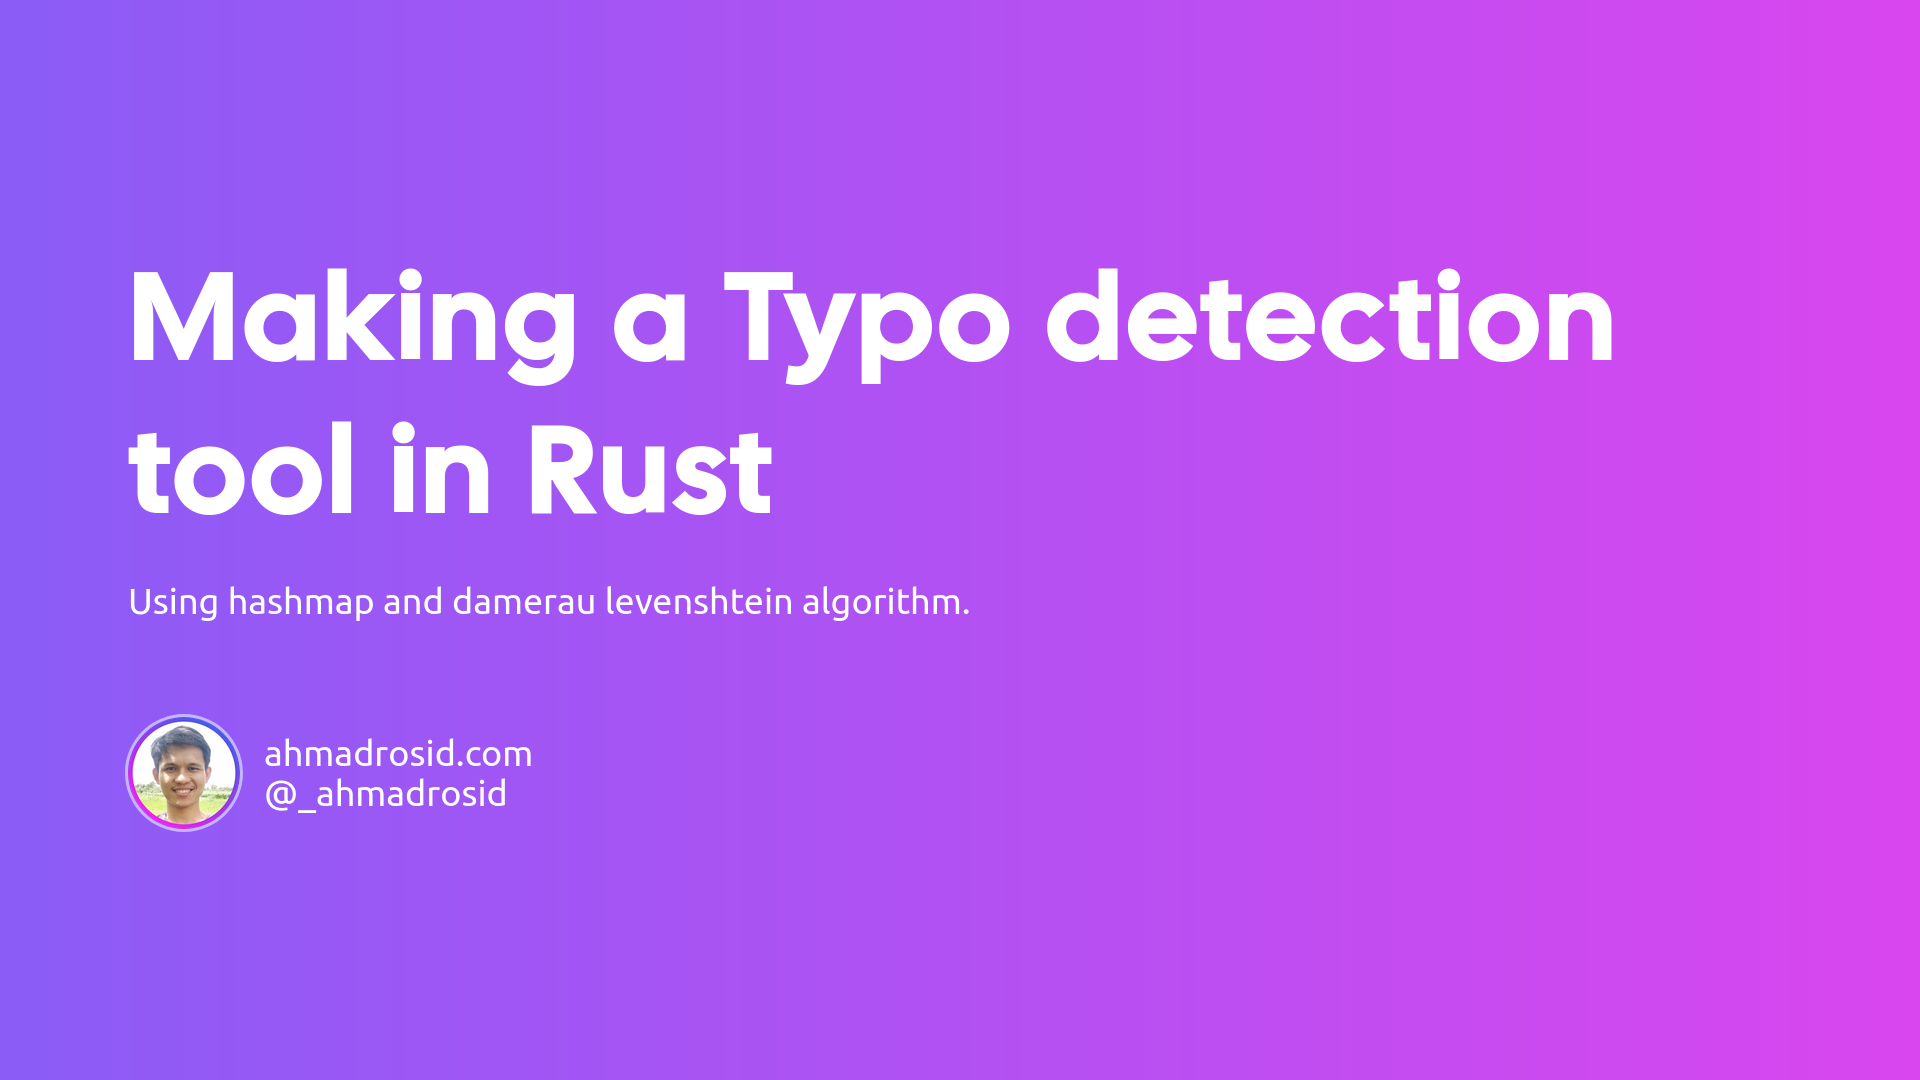 Making a typo detection tool in Rust